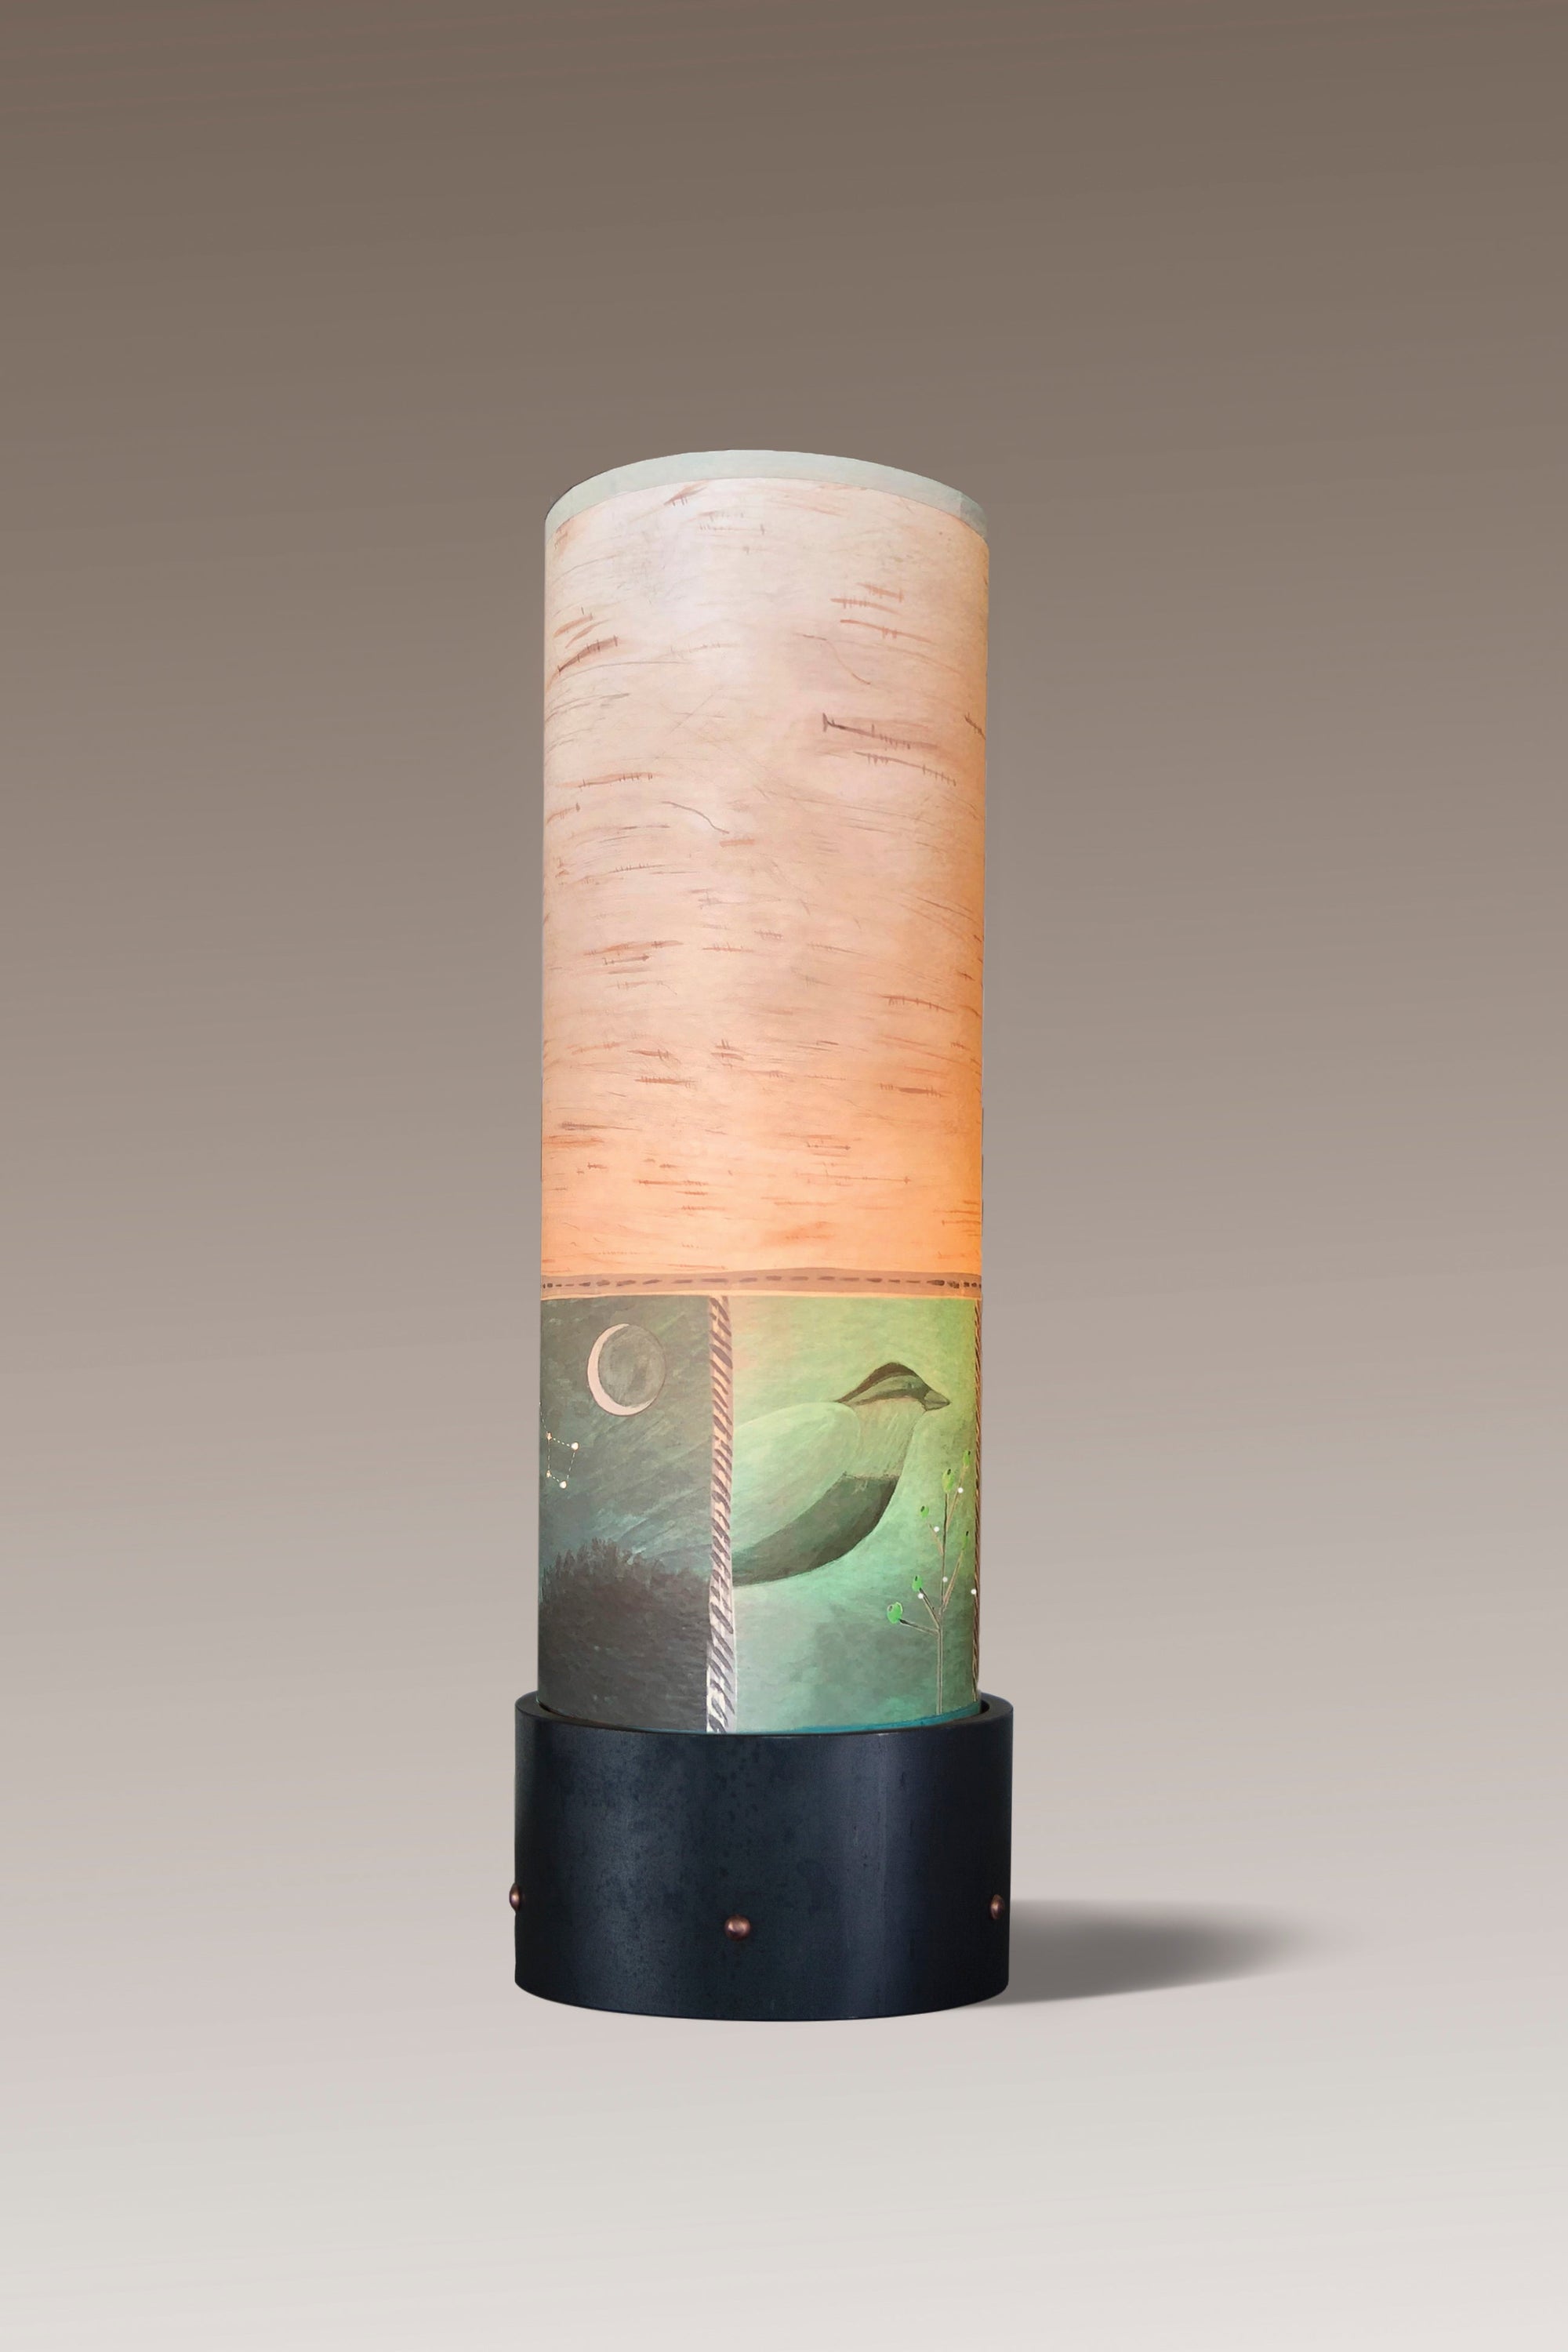 Janna Ugone & Co Luminaires Steel Luminaire Accent Lamp with Woodland Trails in Birch Shade